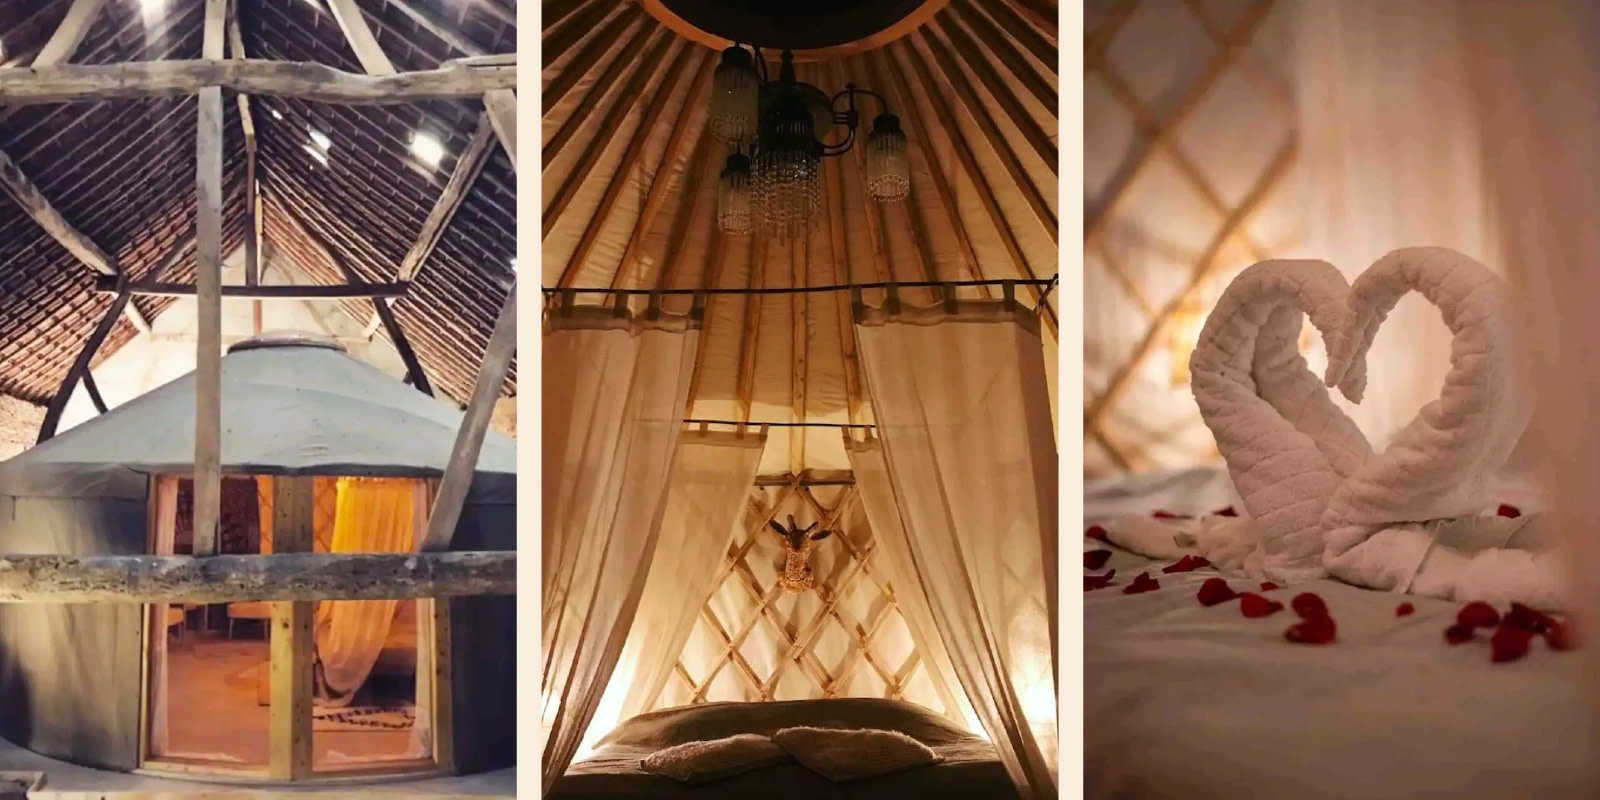 This luxurious yurt in the Netherlands is a perfect romantic glamping getaway